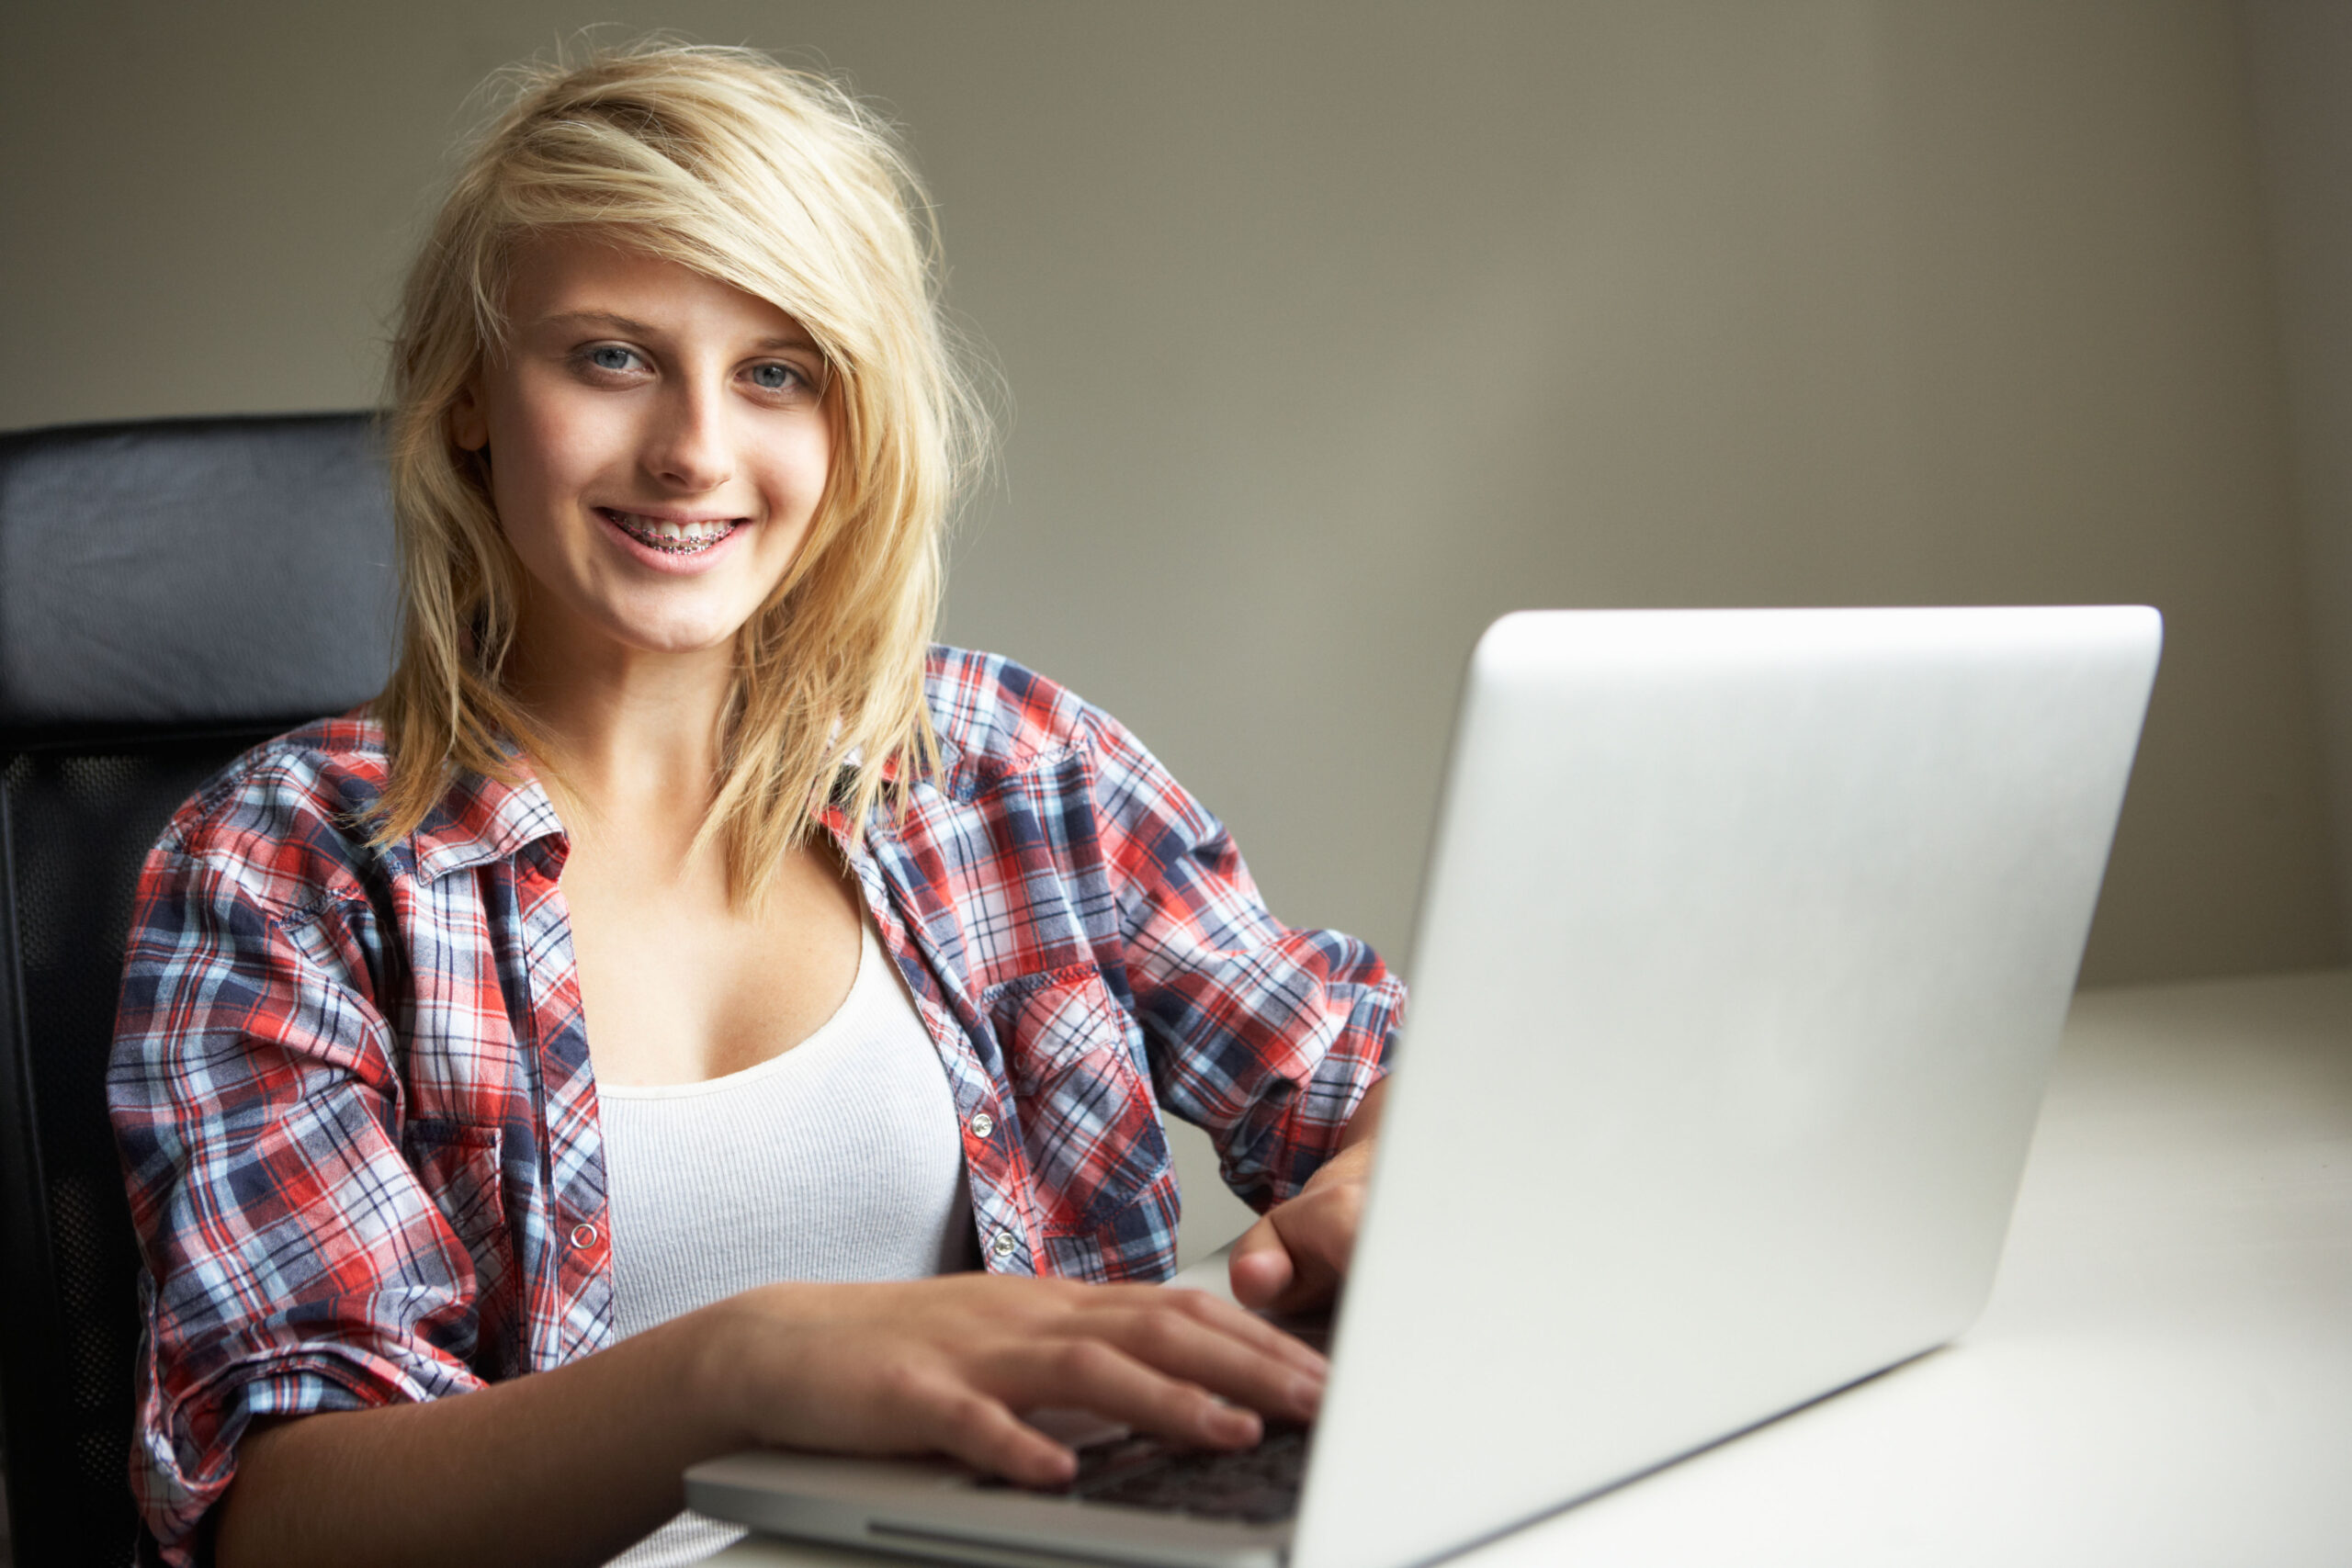 A photograph of a smiling teenage girl sat down at a desk using a laptop.